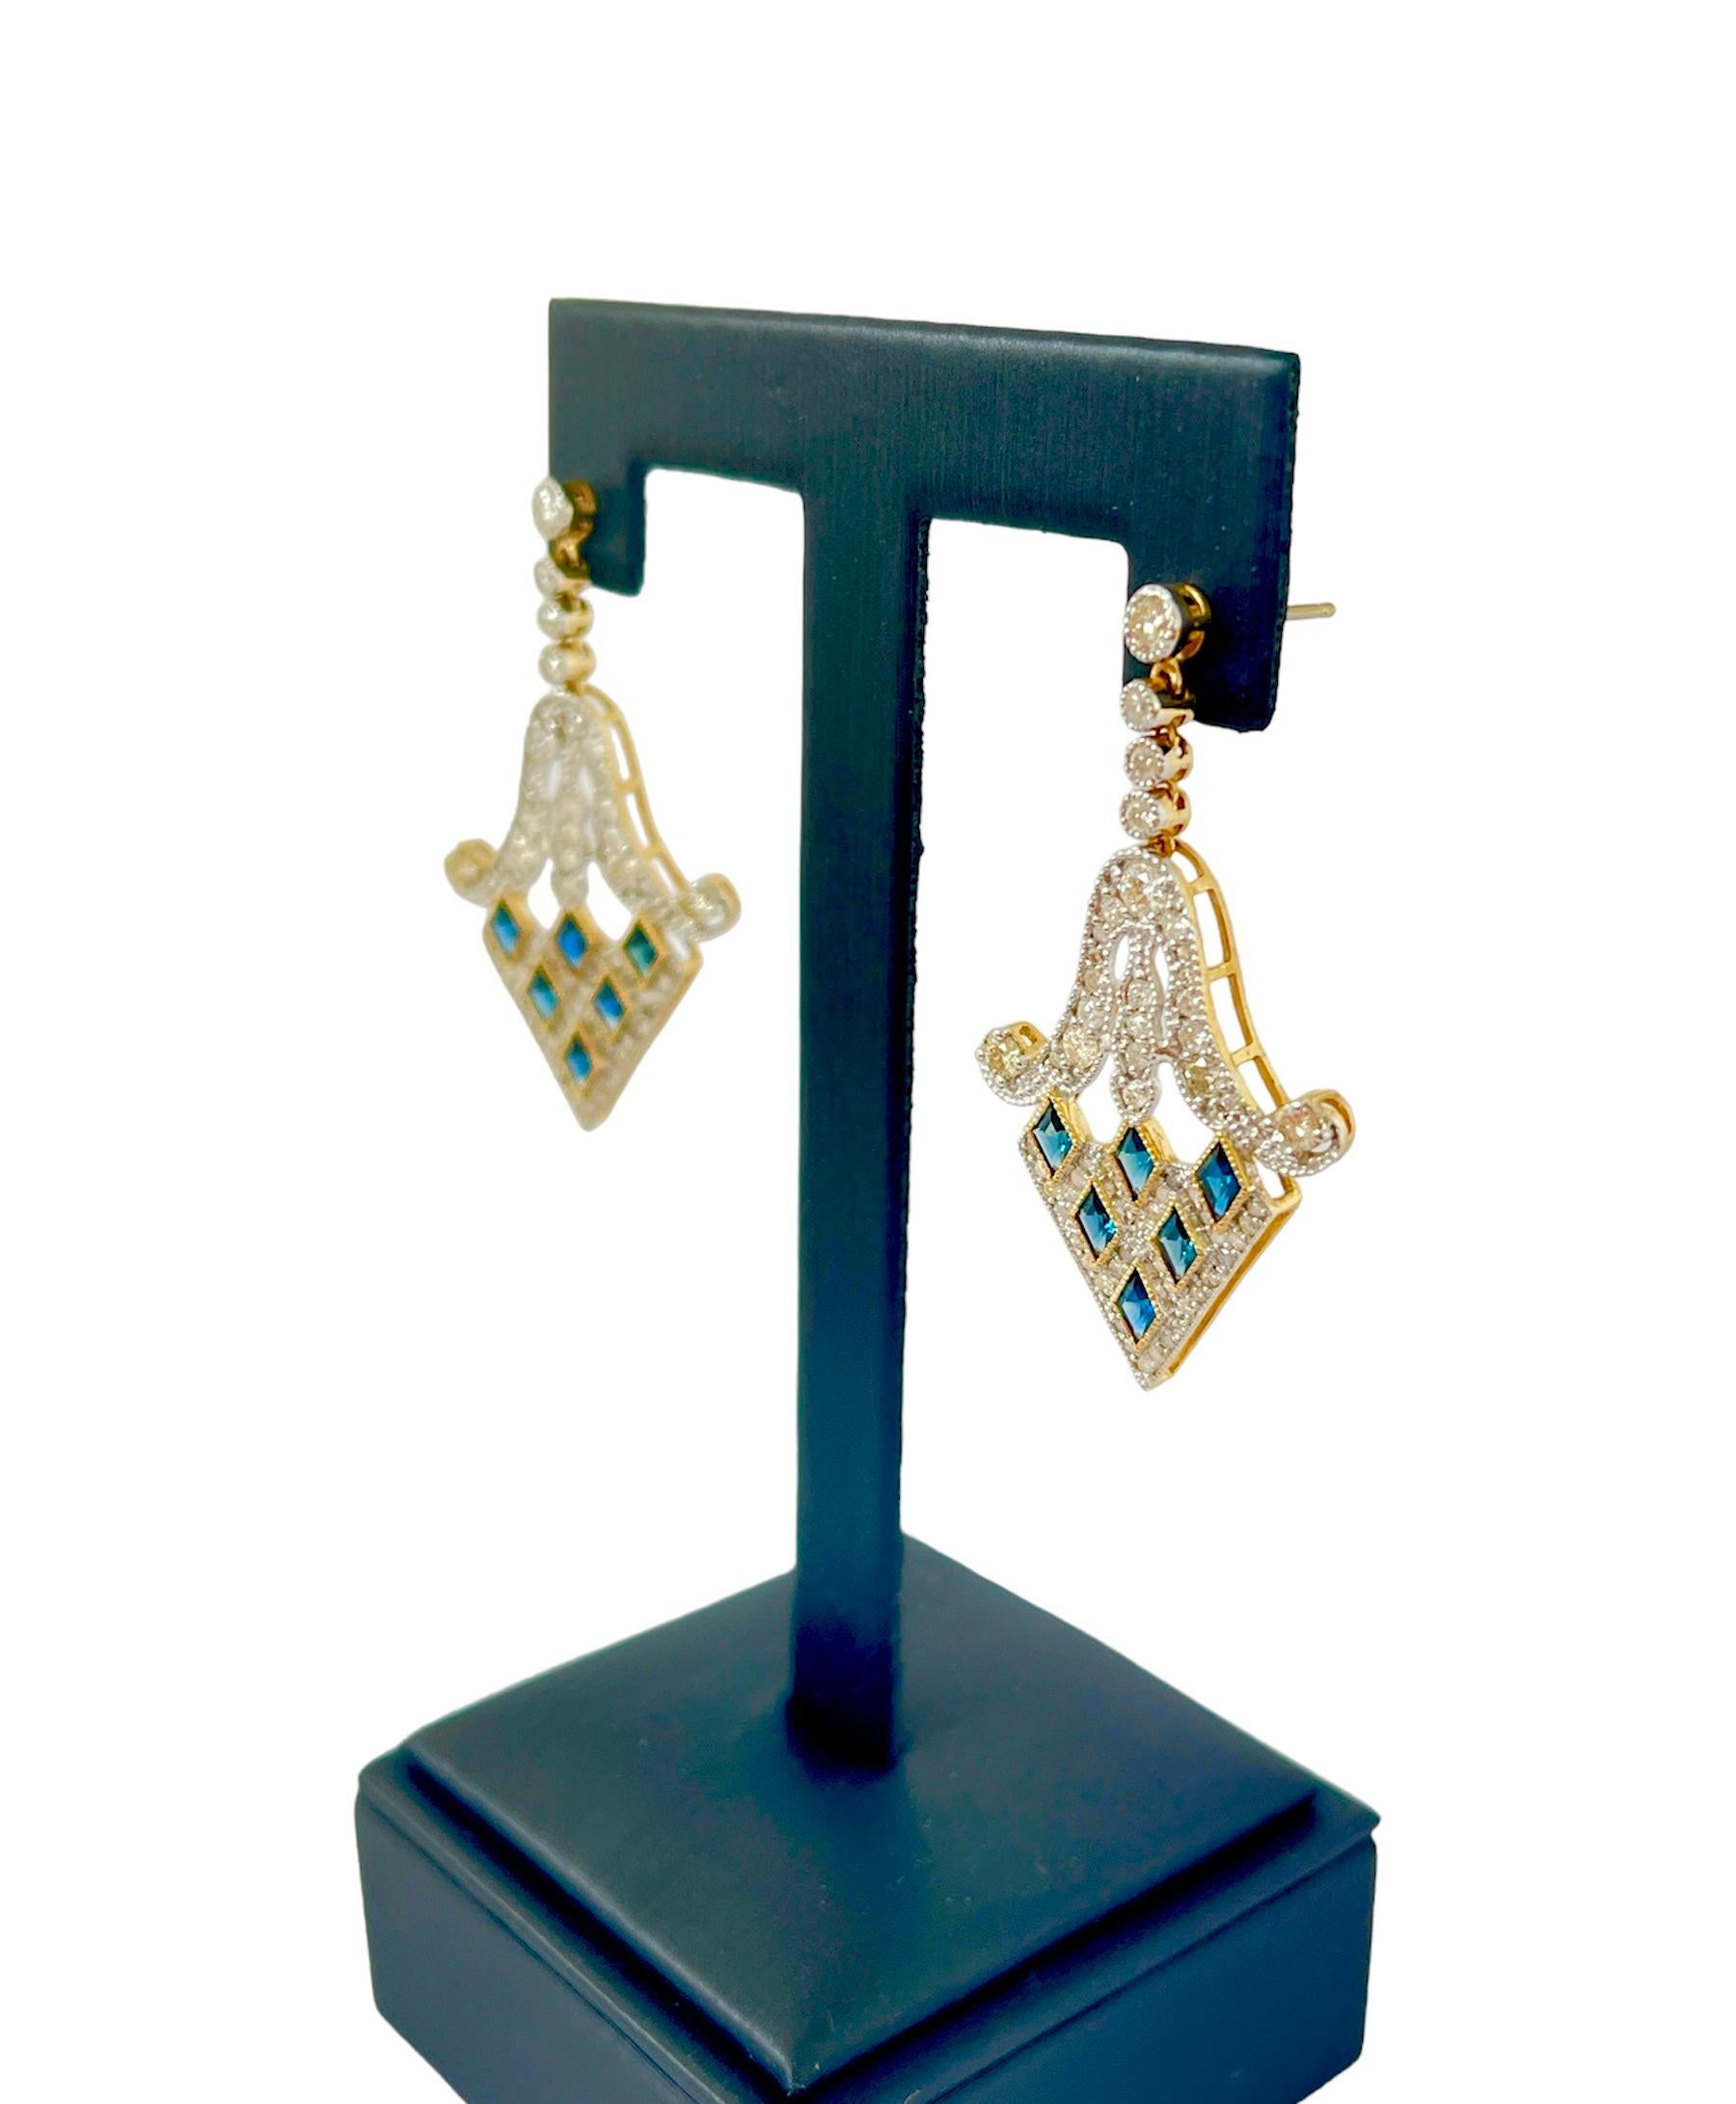 These earrings are truly fit for Royalty! They are set with over 1.50ct in Diamonds.
The design is fashioned on earrings from the Art Deco period when Chevrons and Geometric designs ruled! Crafted in 9ct Yellow Gold and set with natural Diamonds and